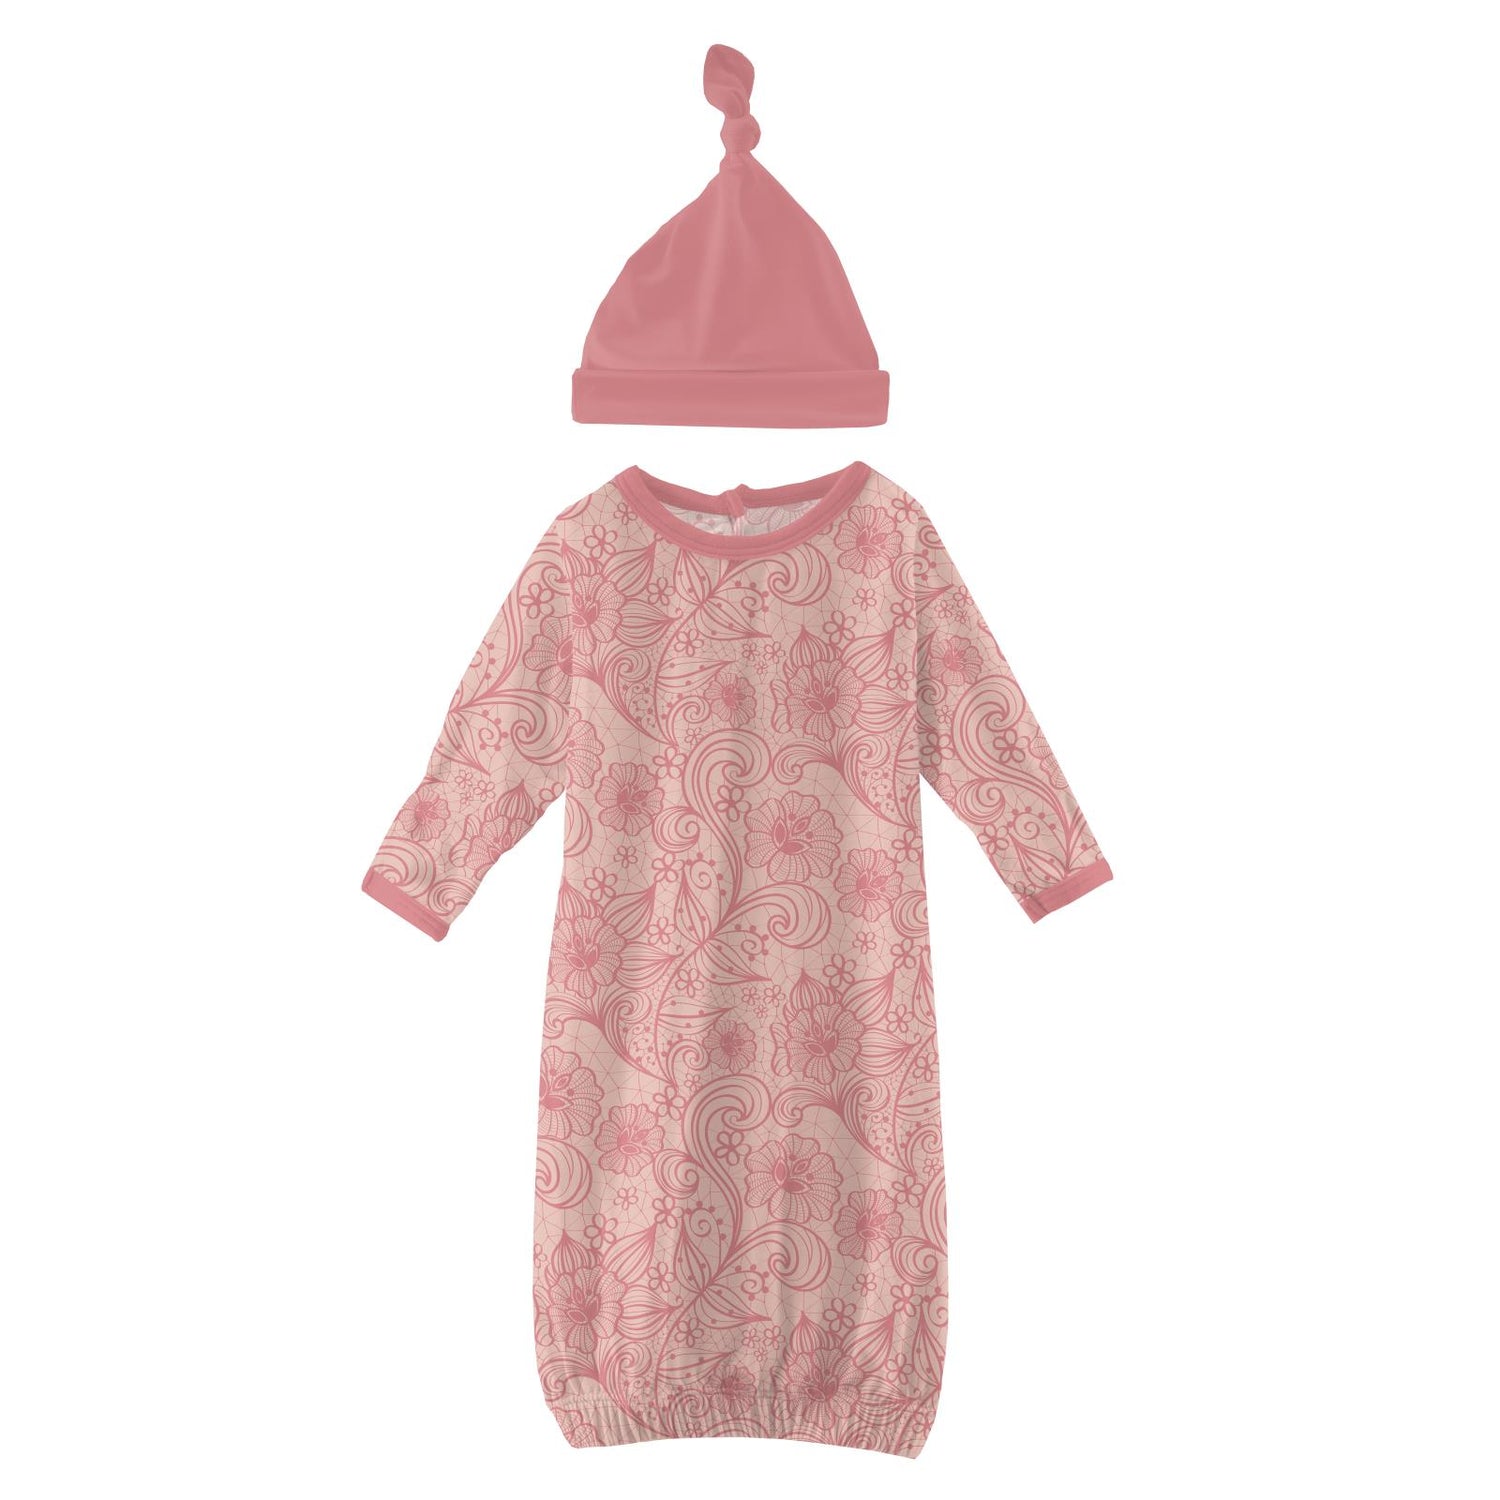 Print Layette Gown & Single Knot Hat Set in Peach Blossom Lace